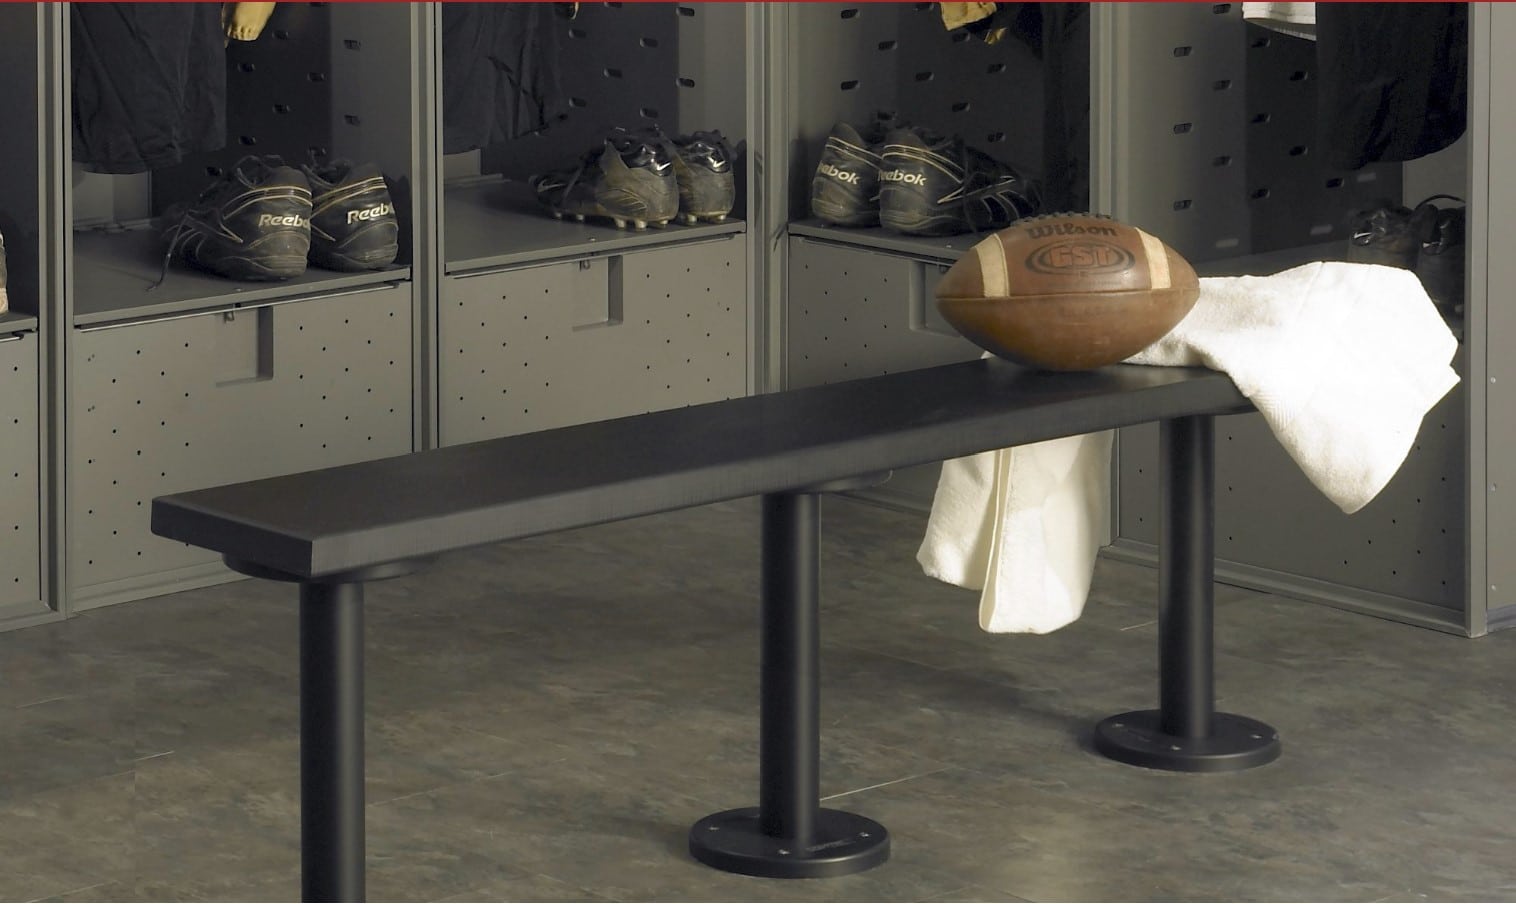 Black HDPE solid plastic locker room bench with a football and towel on top